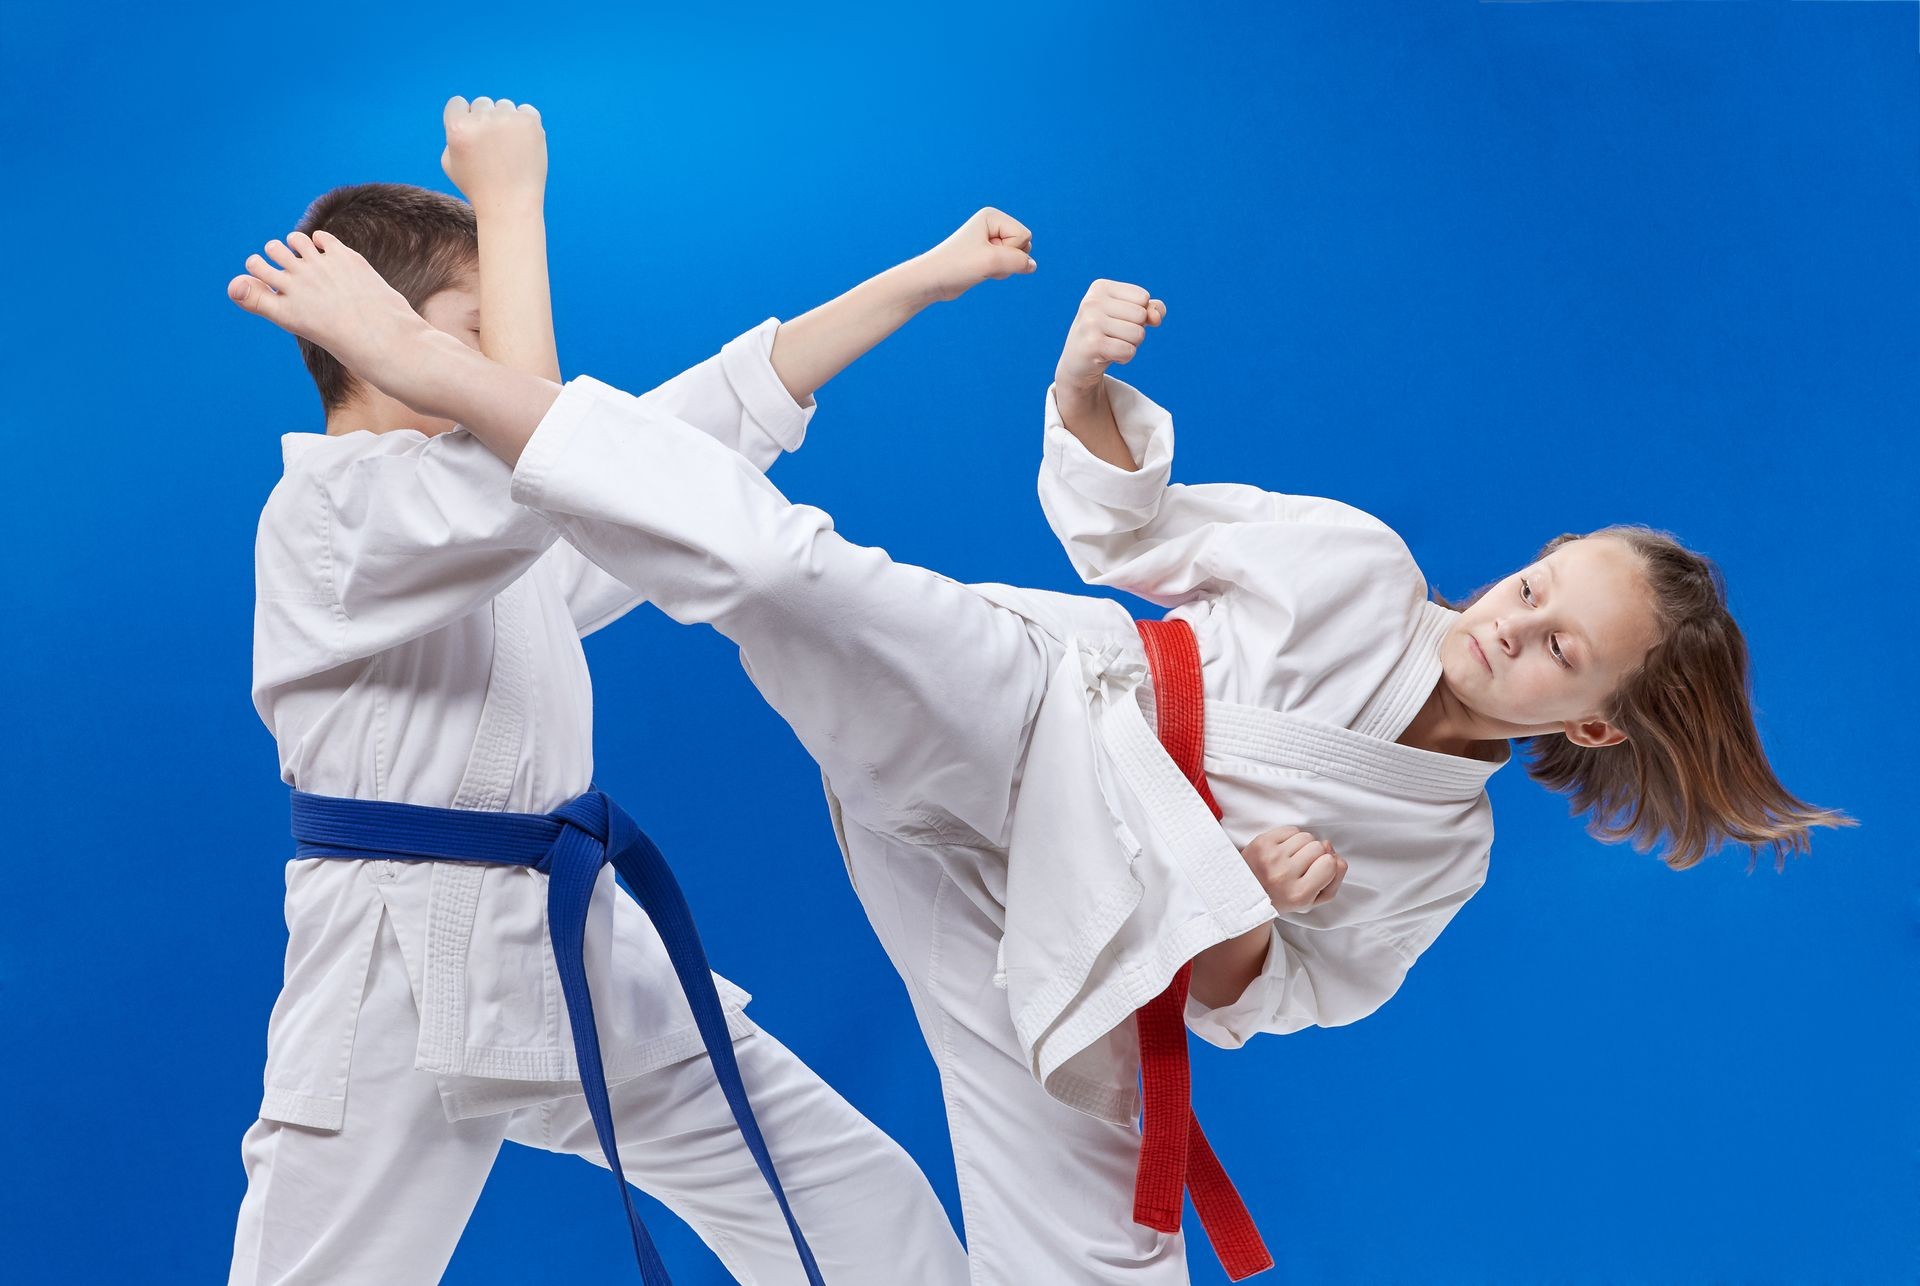 A circular punch and block are training boy and girl